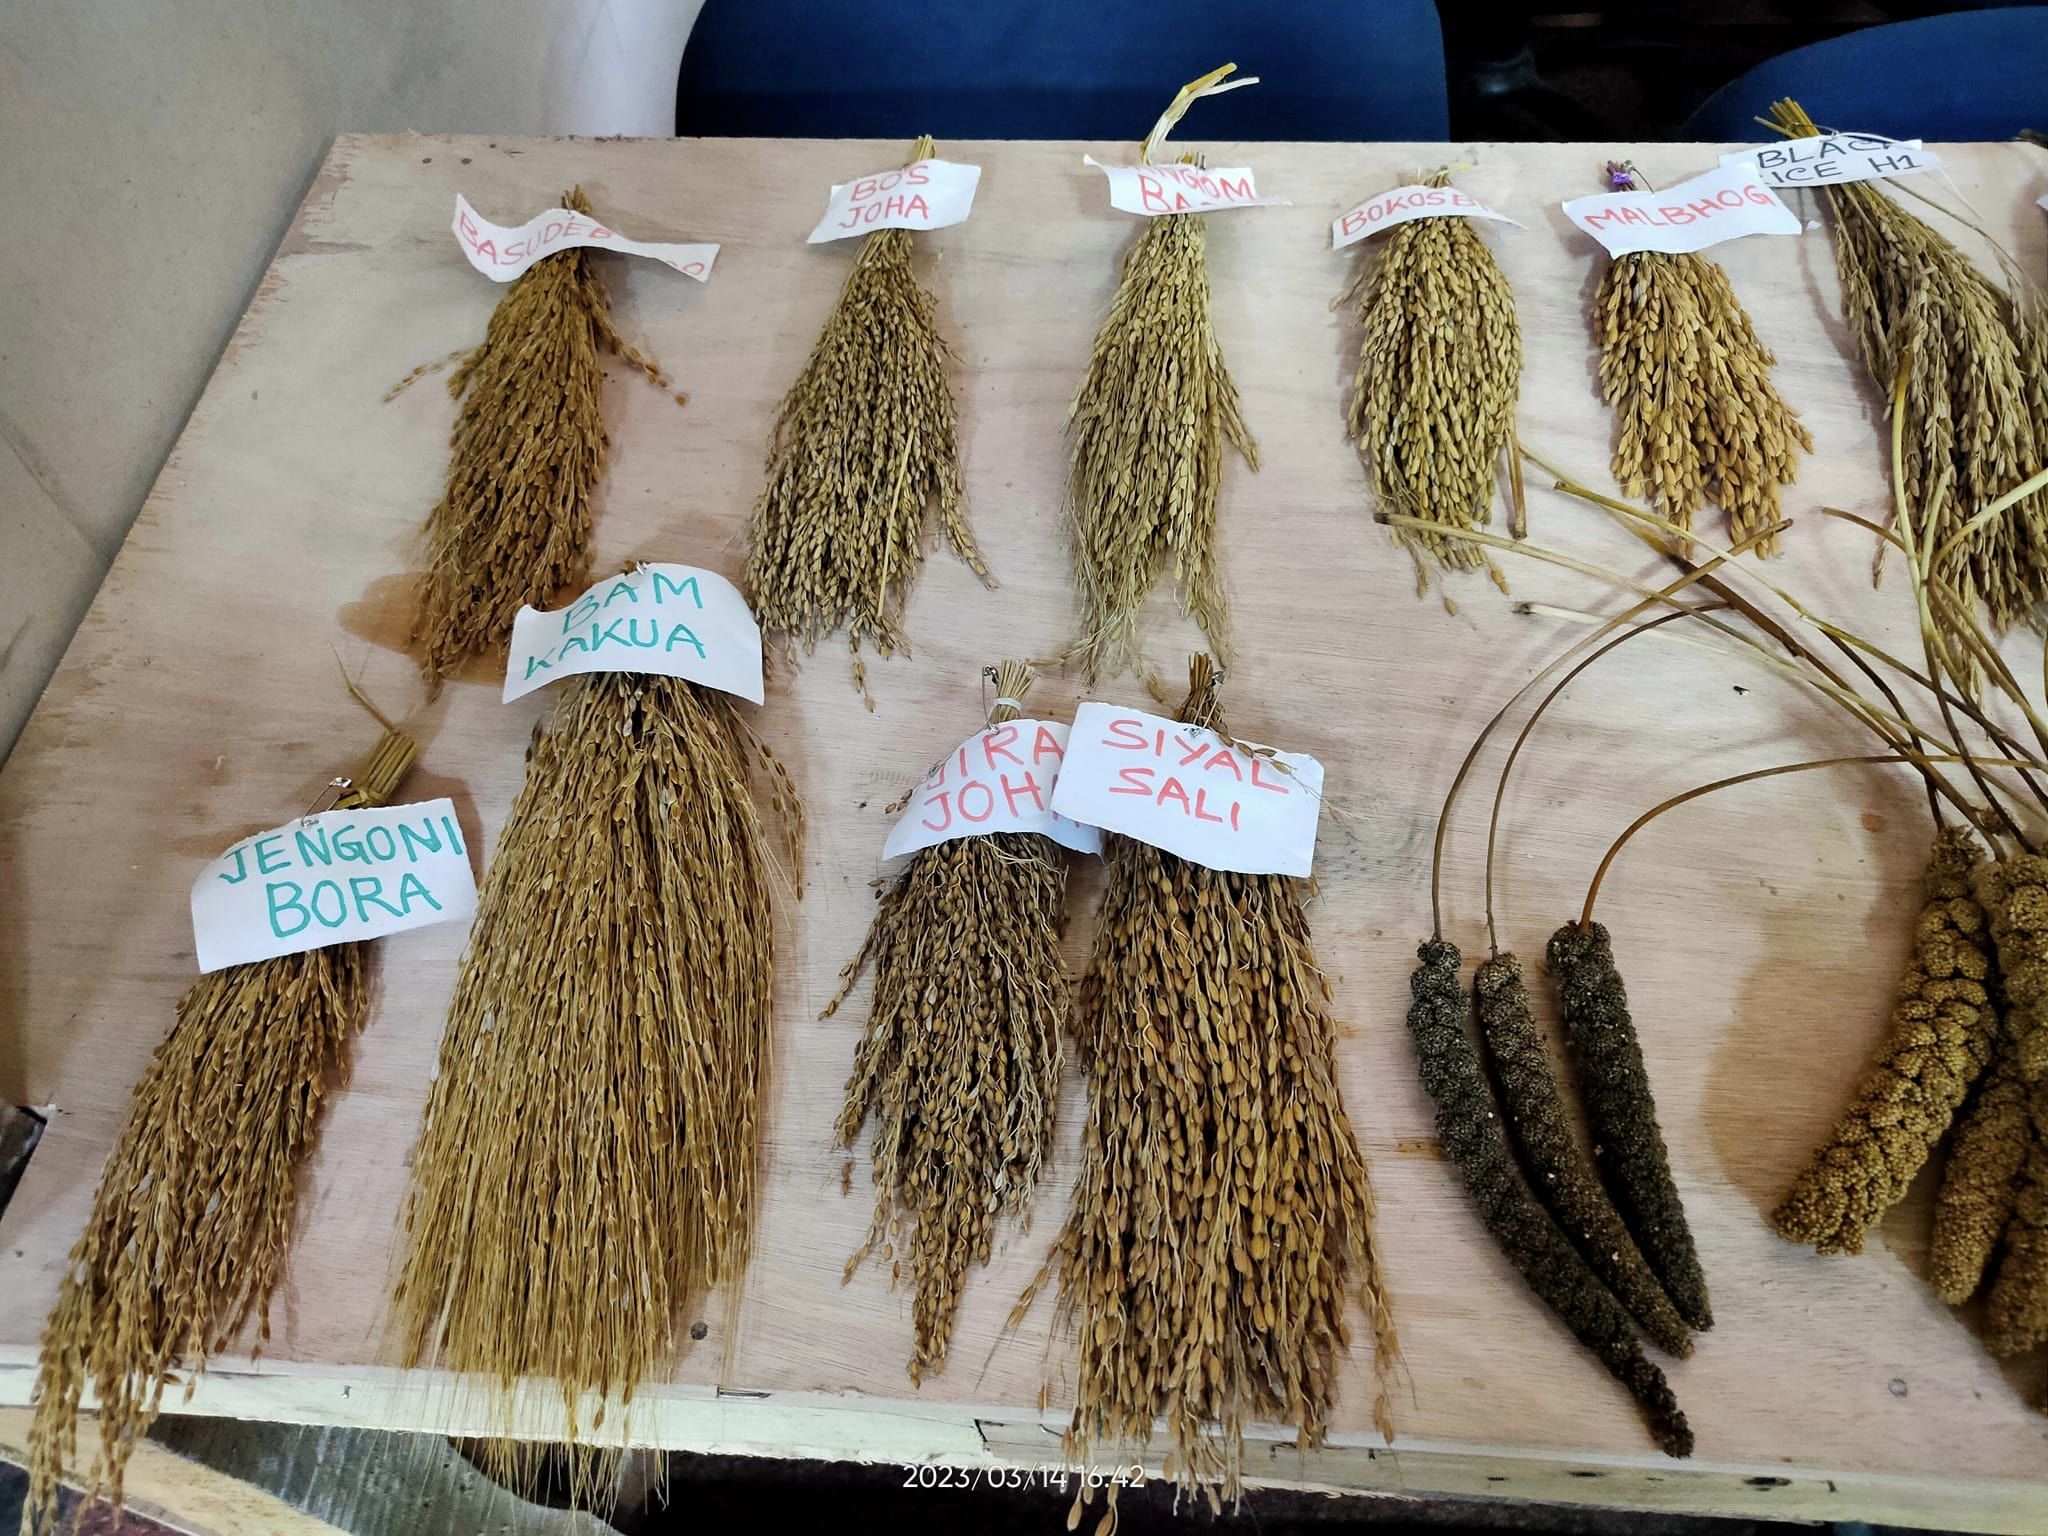 indigenous paddy seeds